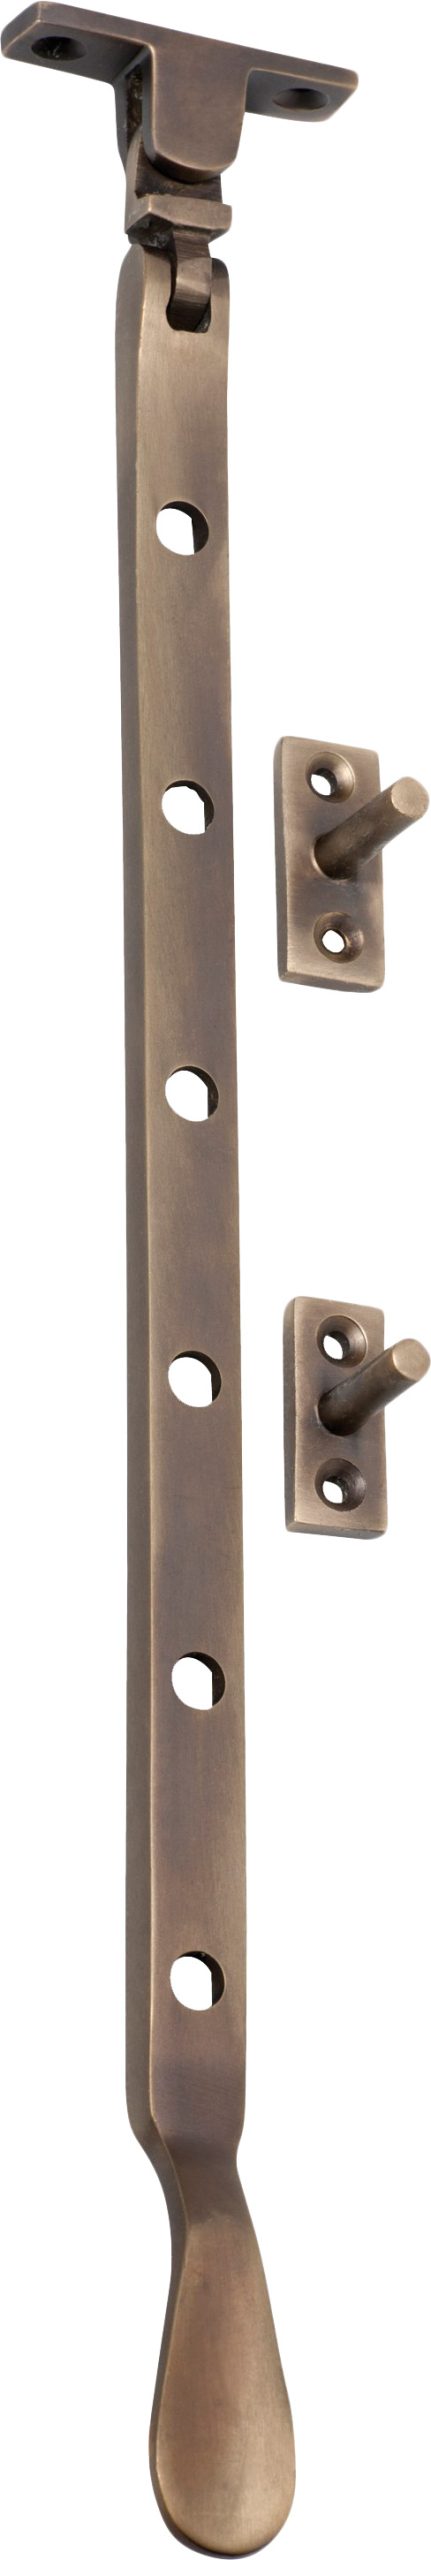 Base Fix Casement Stays - 300mm by Tradco